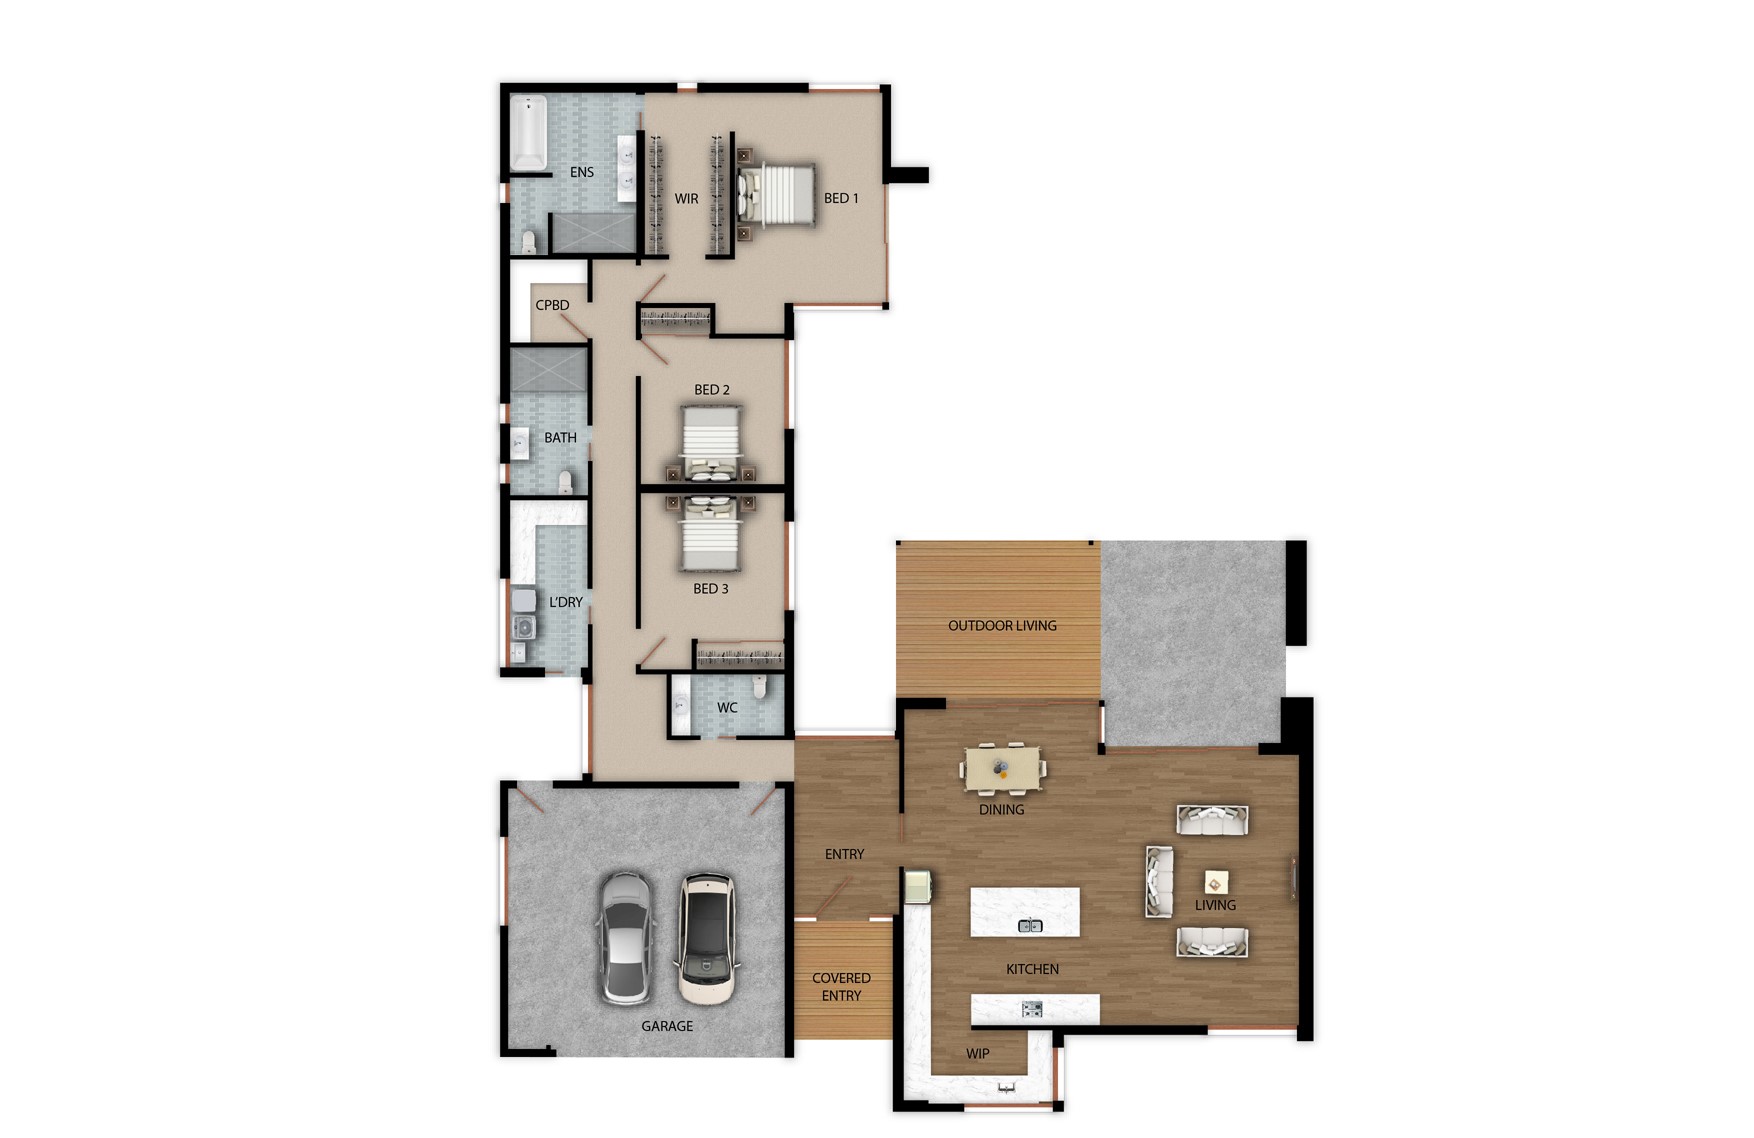 Oakbridge Floor Plan NZ - Our spacious open plan design that seamlessly connects living areas and offers stylish functionality. Enjoy ultimate convenience.